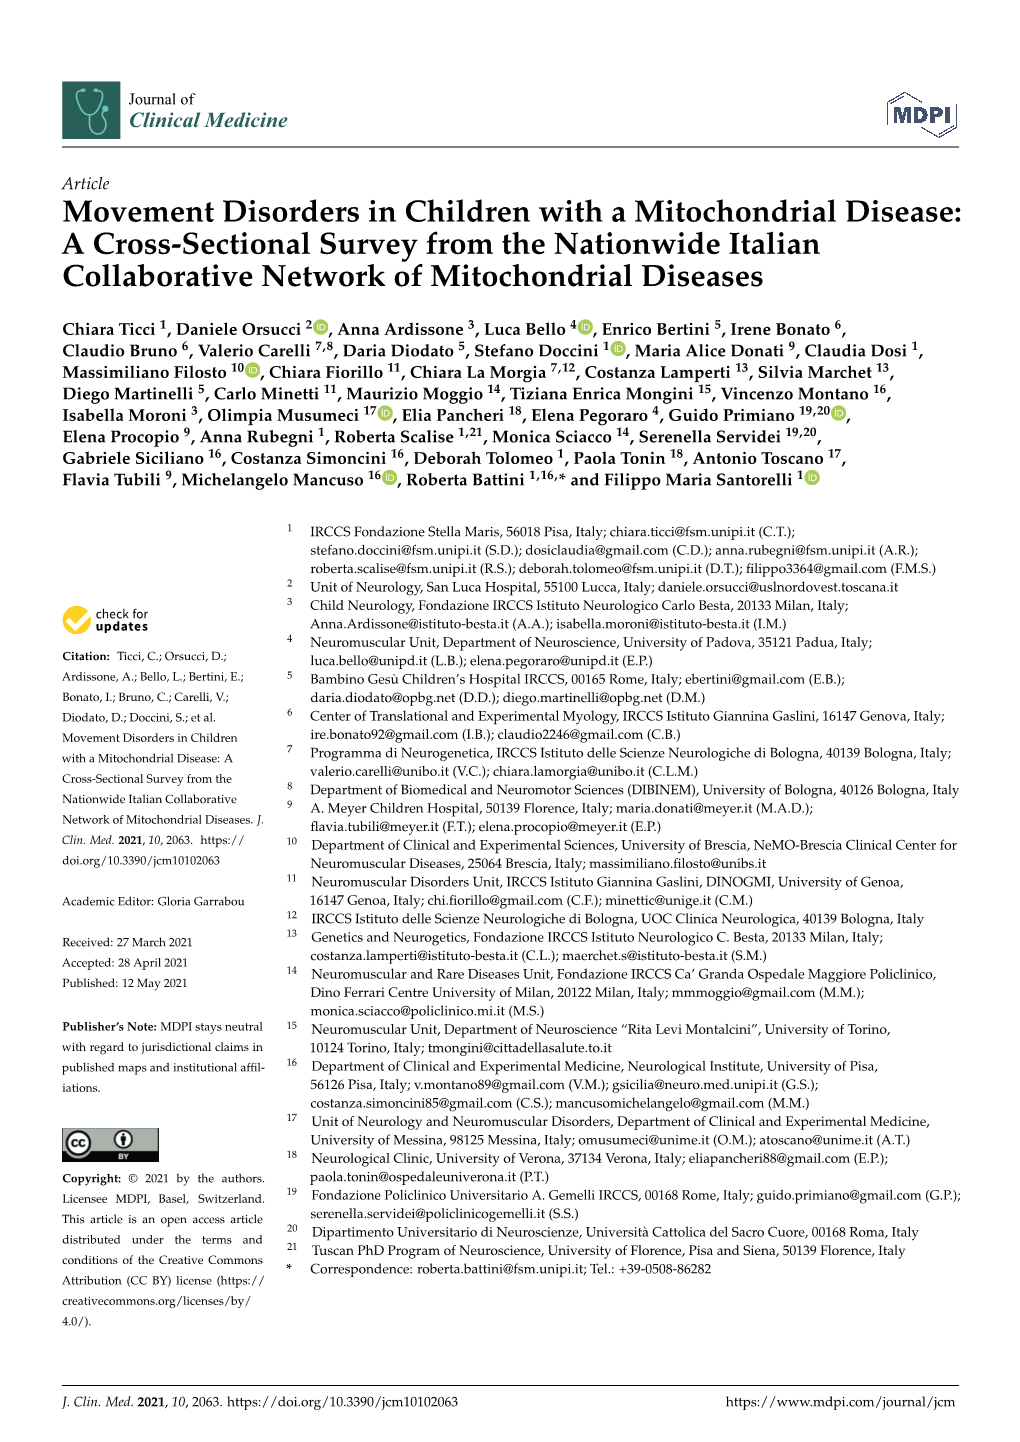 Movement Disorders in Children with a Mitochondrial Disease: a Cross-Sectional Survey from the Nationwide Italian Collaborative Network of Mitochondrial Diseases